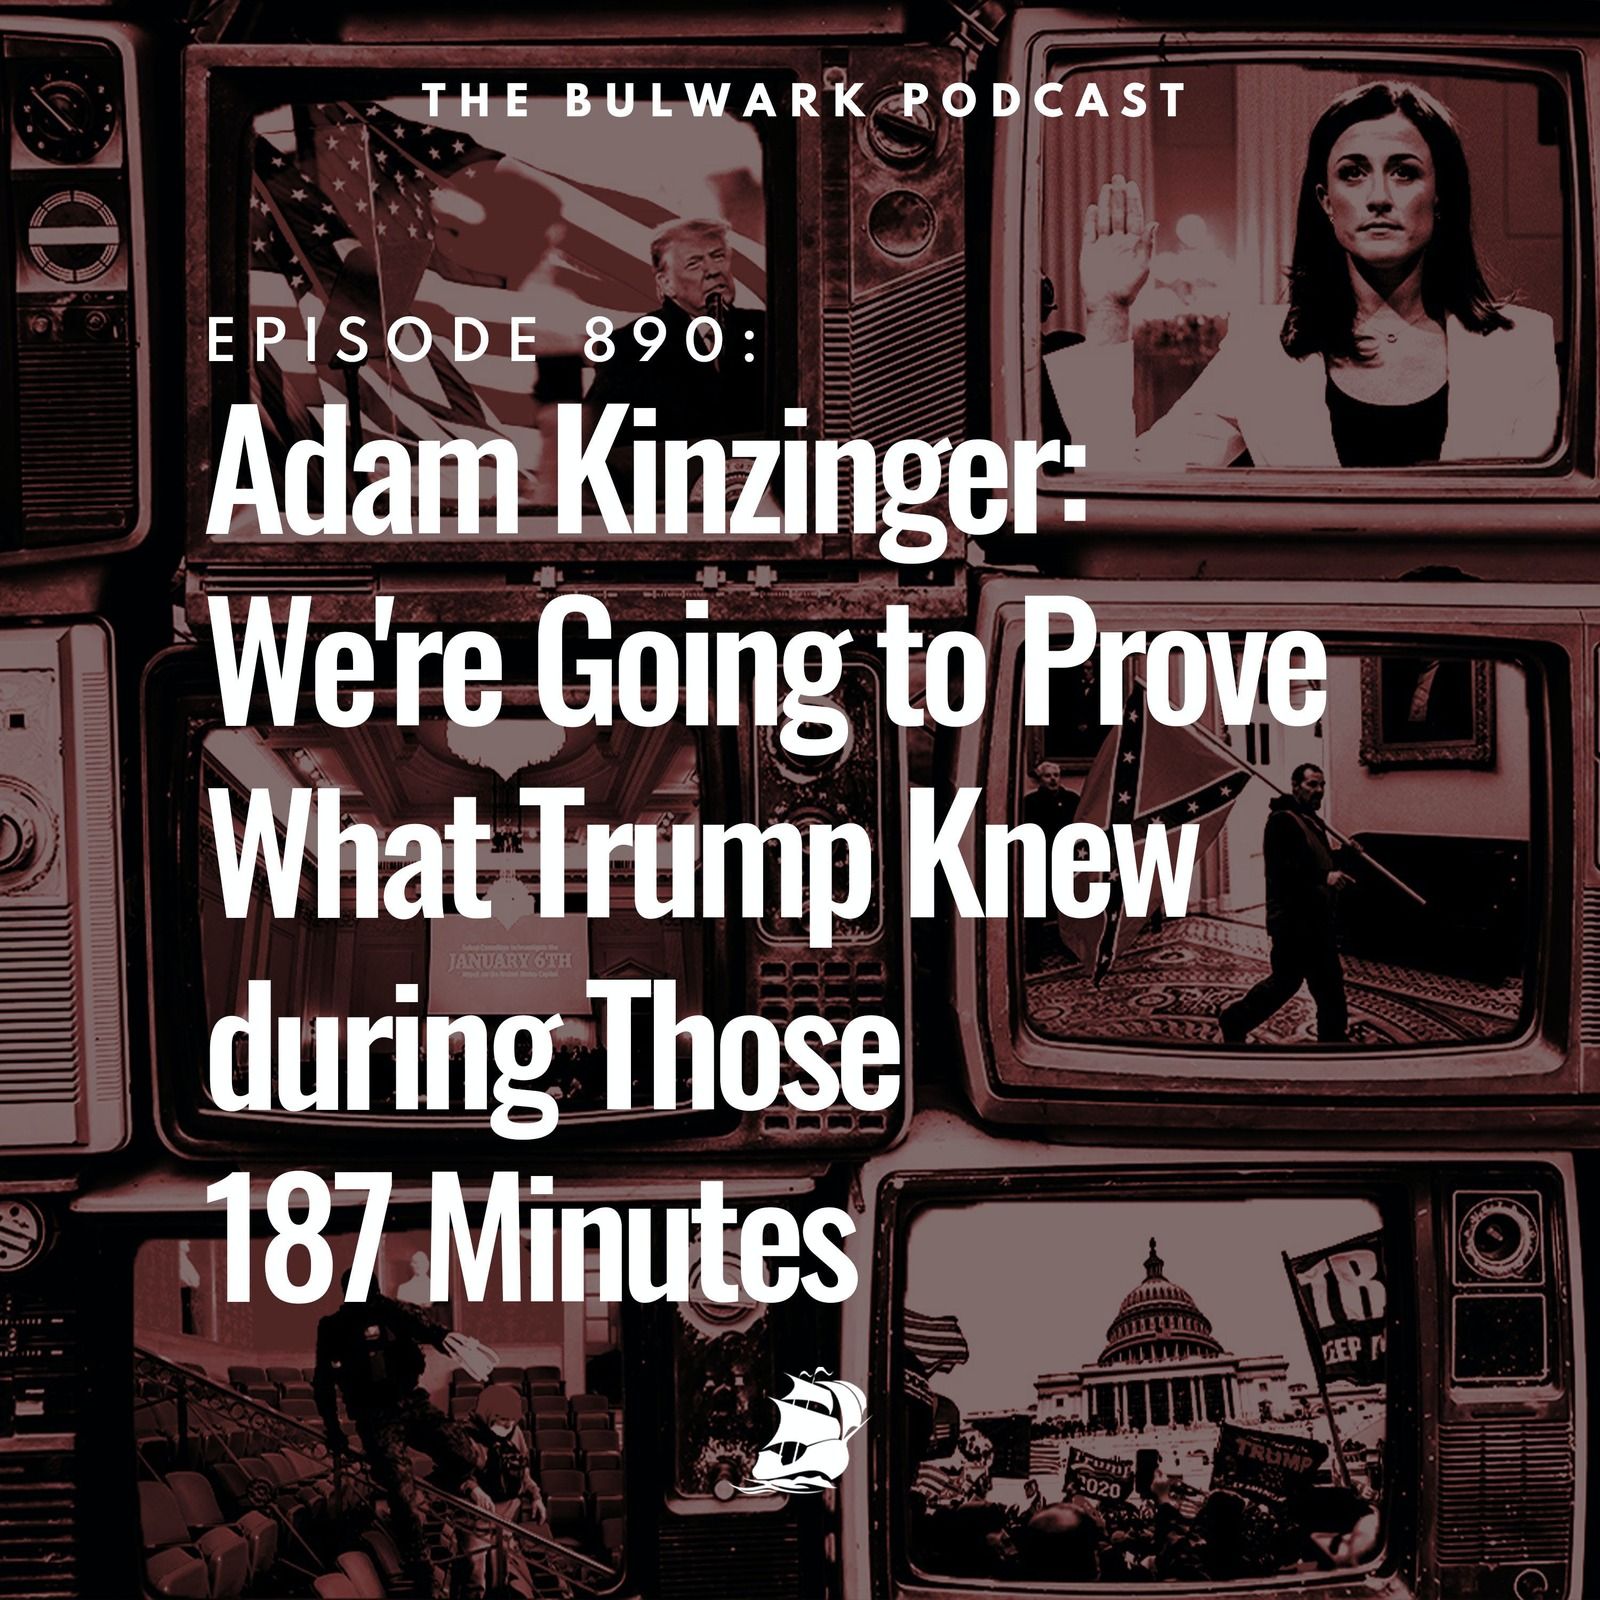 Adam Kinzinger: We're Going to Prove What Trump Knew during Those 187 Minutes by The Bulwark Podcast